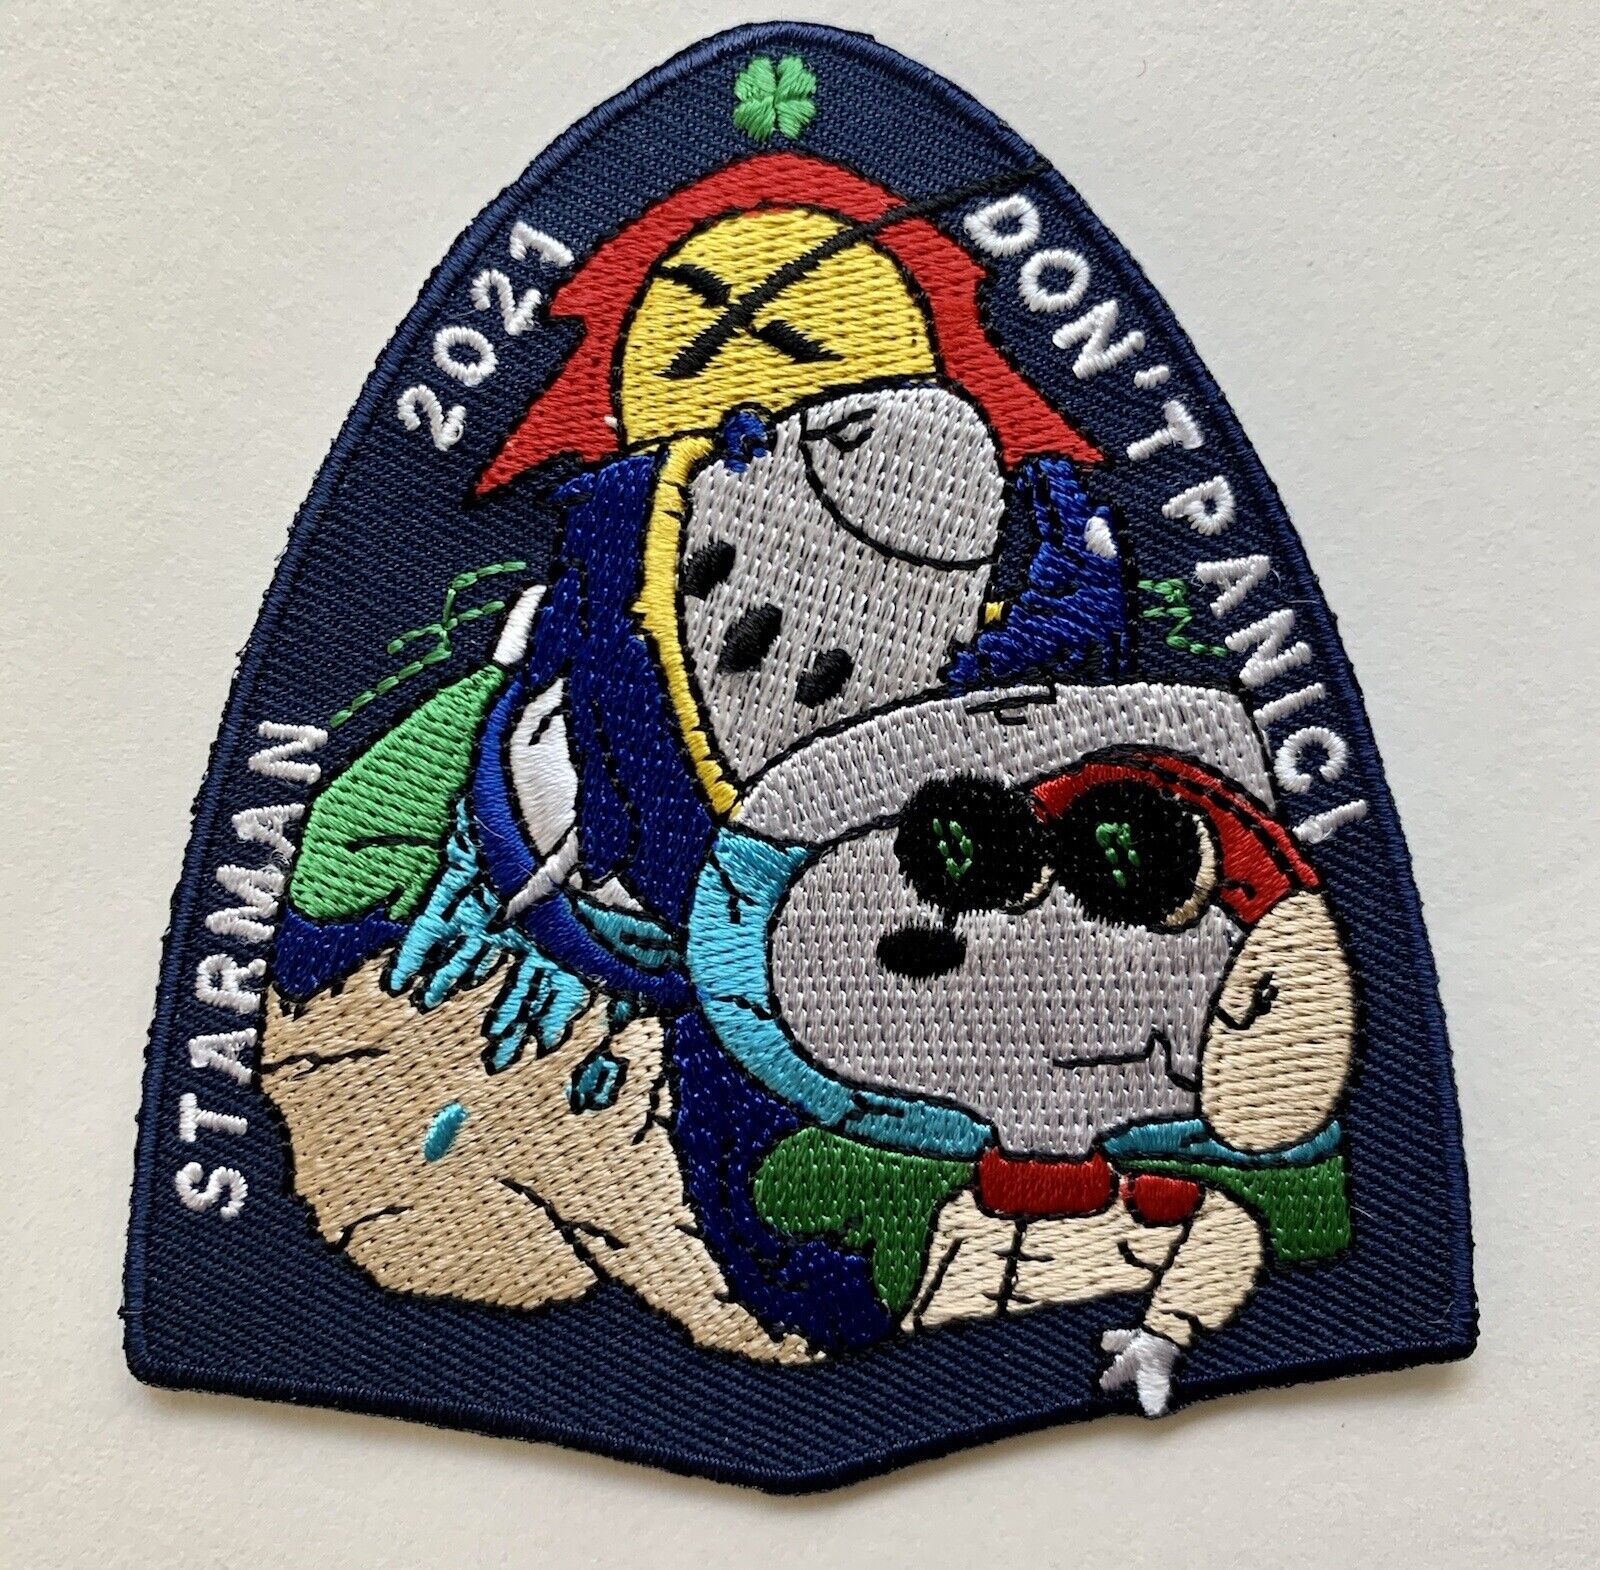 Original SpaceX Snoopy Starman Mission to Mars Patch